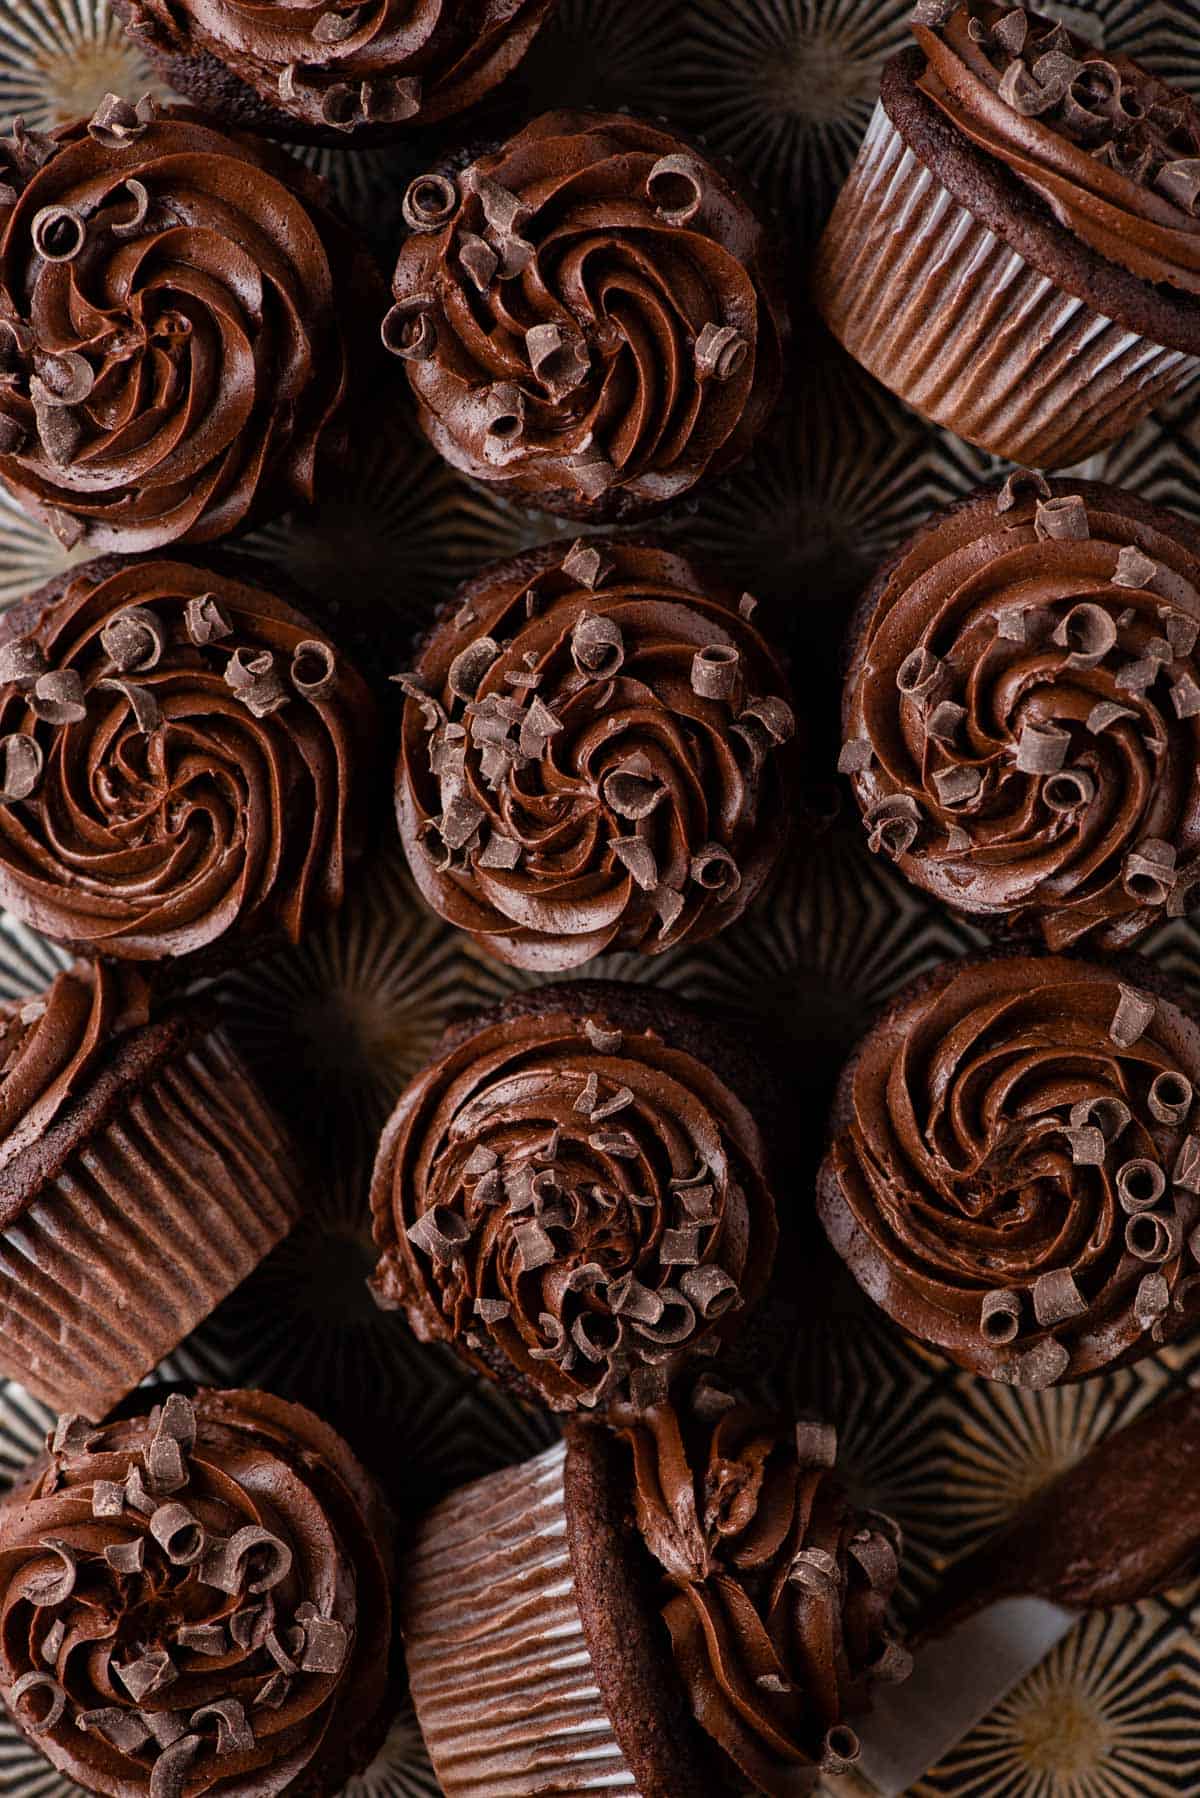 aeriel shot of chocolate cupcakes with chocolate frosting arranged in a grid pattern on metal surface